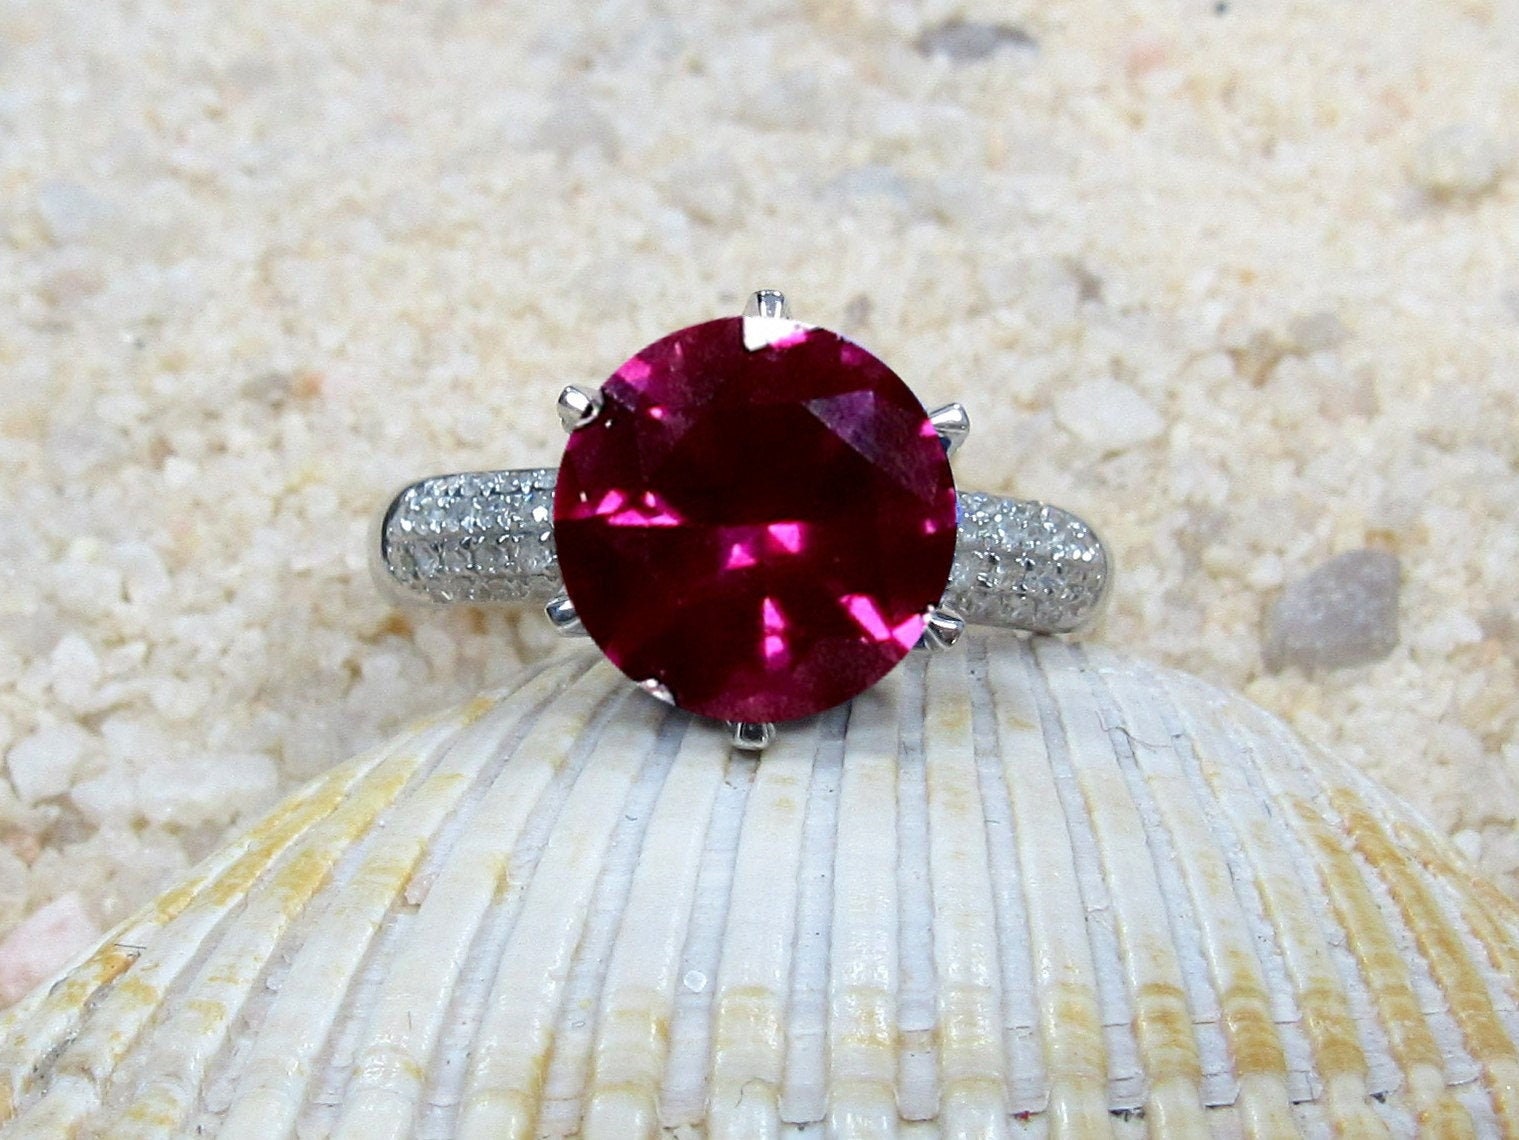 3ct Crown Jewel 9mm Round High Profile Ruby & Diamonds prongs Engagement Ring BellaMoreDesign.com